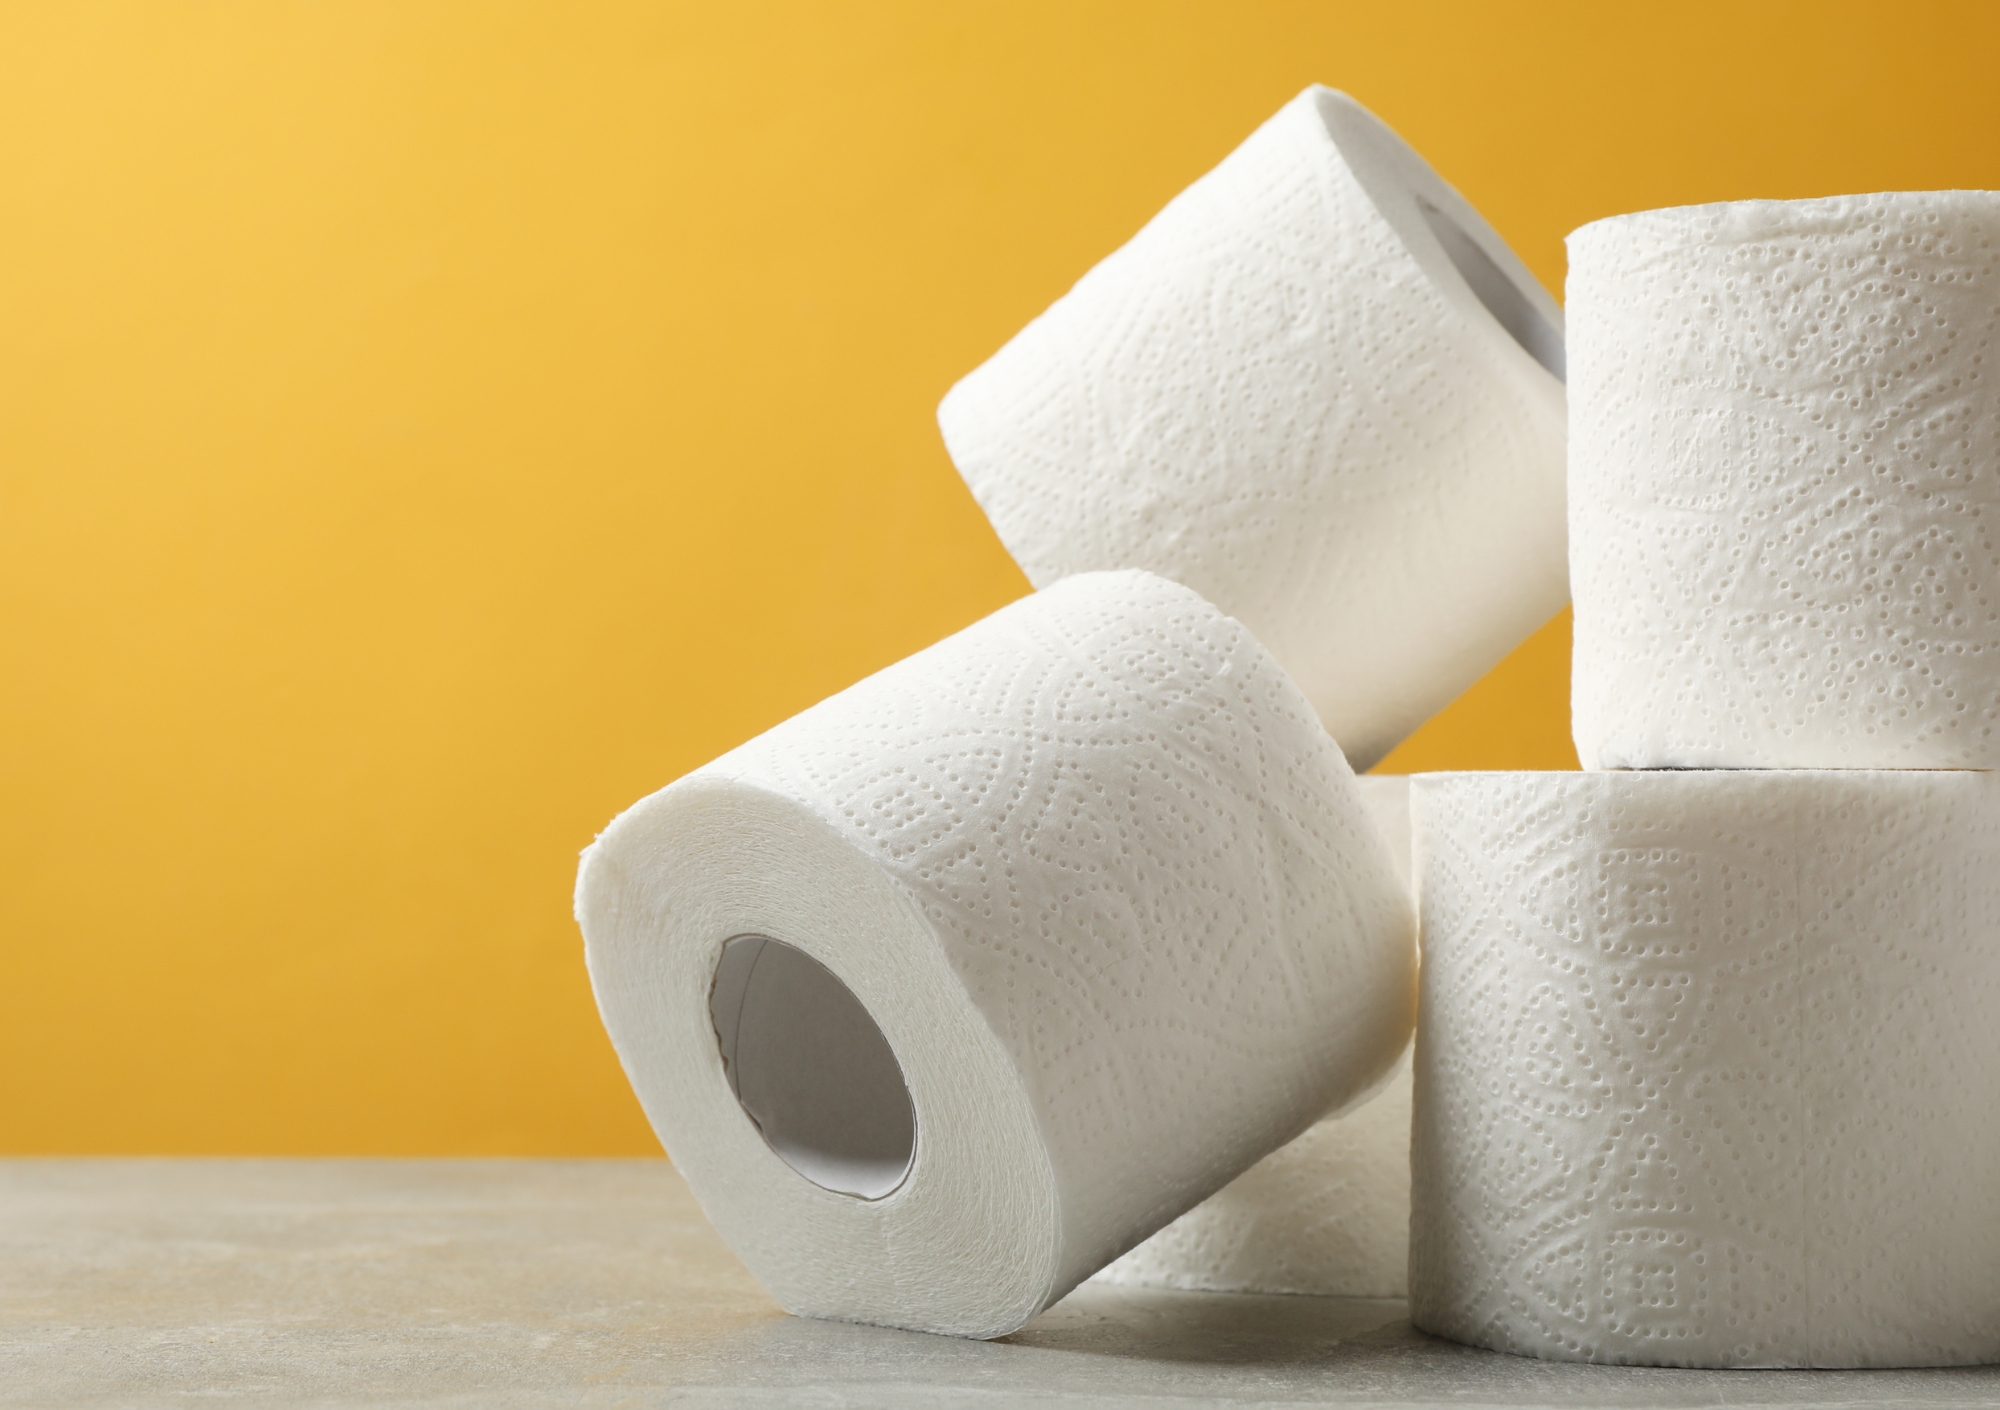 Four rolls of toilet paper stacked against a yellow background.